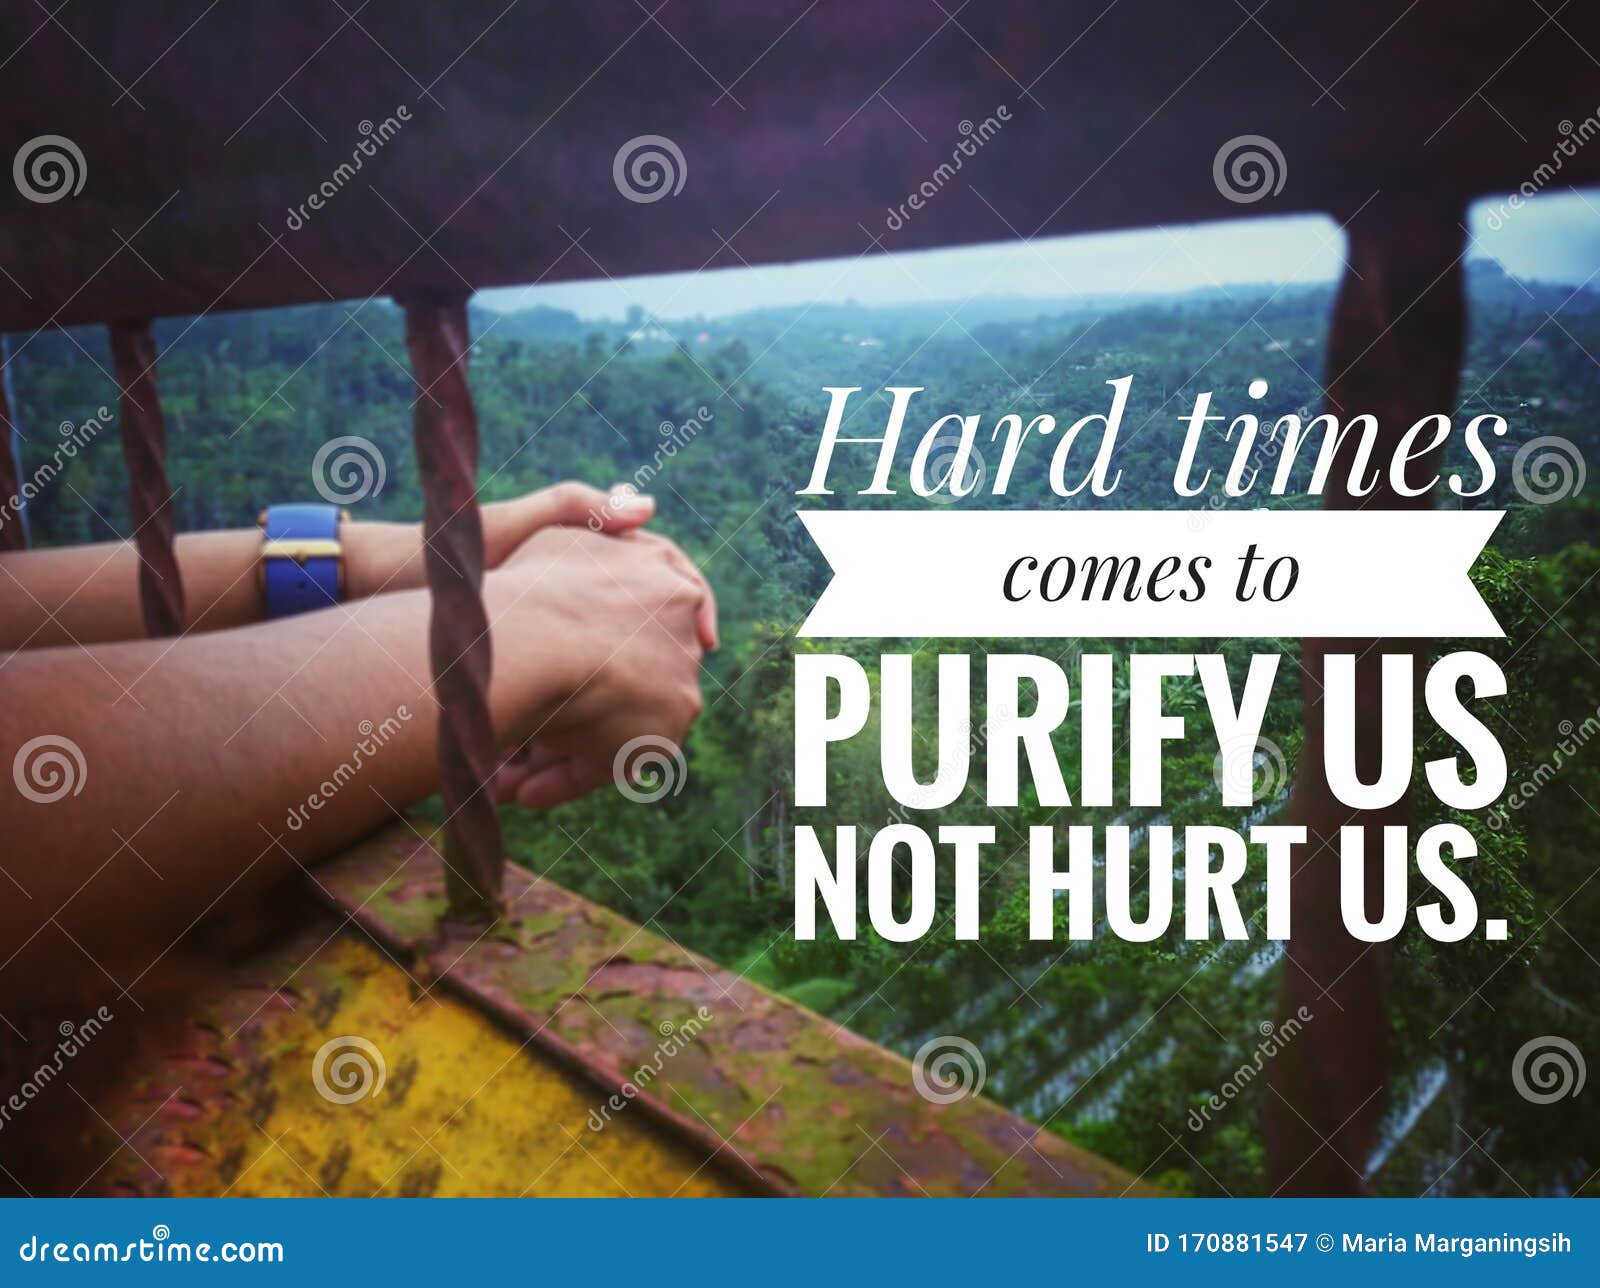 inspirational quote - hard times comes to purify us not hurt us. with blurry background of imprisoned hands and fresh green nature